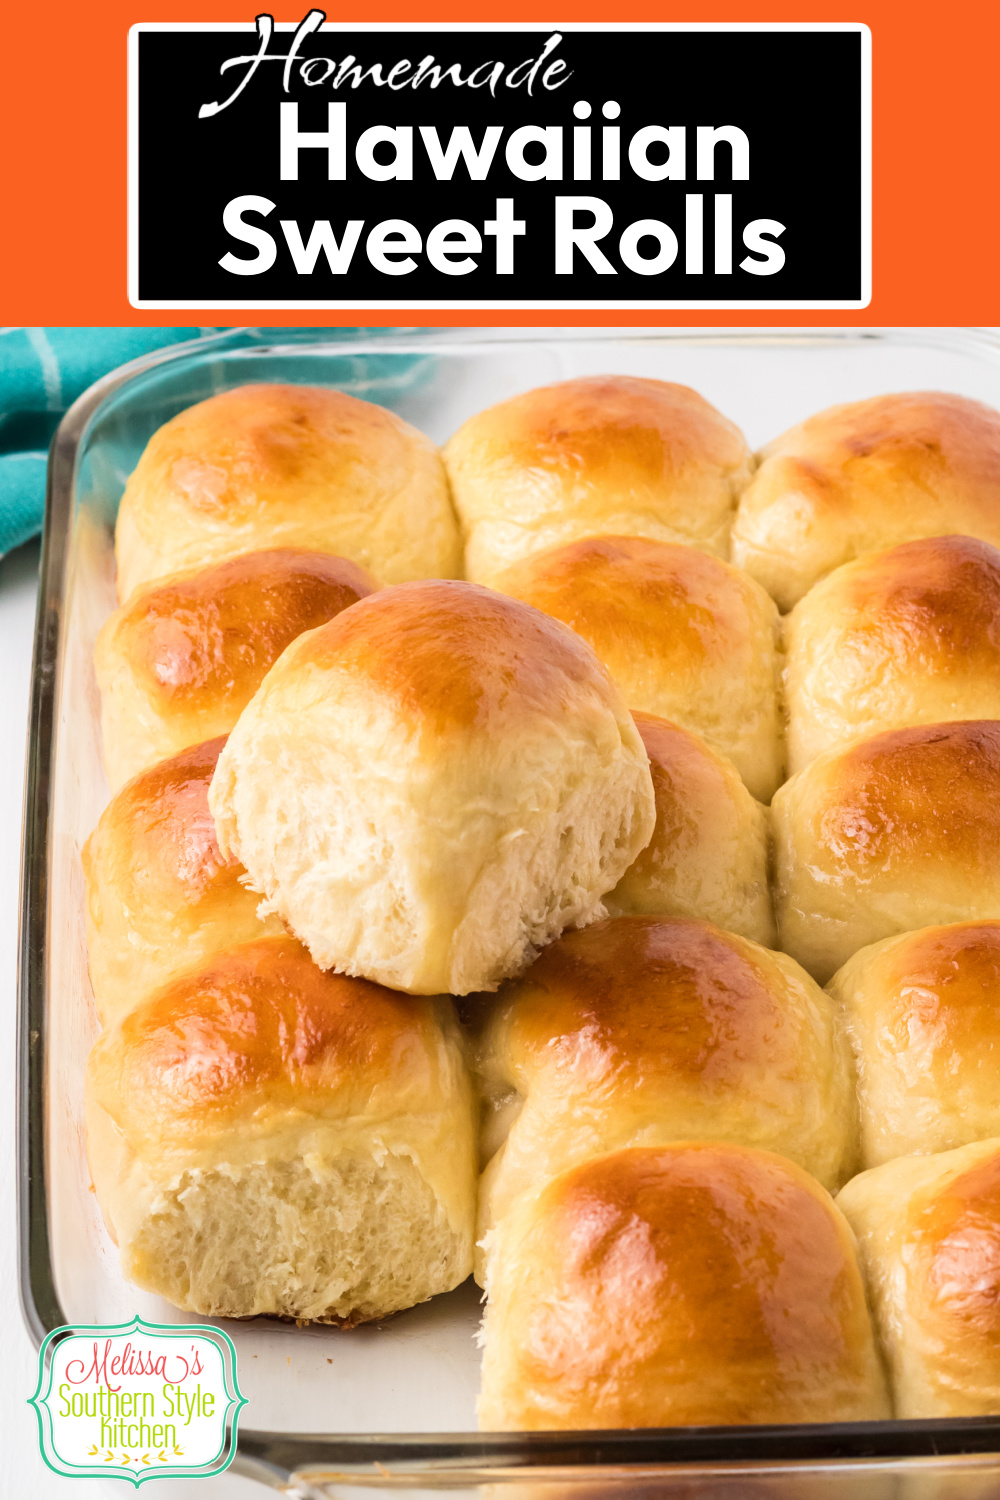 These Homemade Hawaiian Sweet Rolls are sweet and buttery making them a delicious choice for serving at any meal #hawaiiansweetrolls #copycatHawaiiansrolls #homemaderolls #rollsrecipe #easyrolls #dinnerrolls